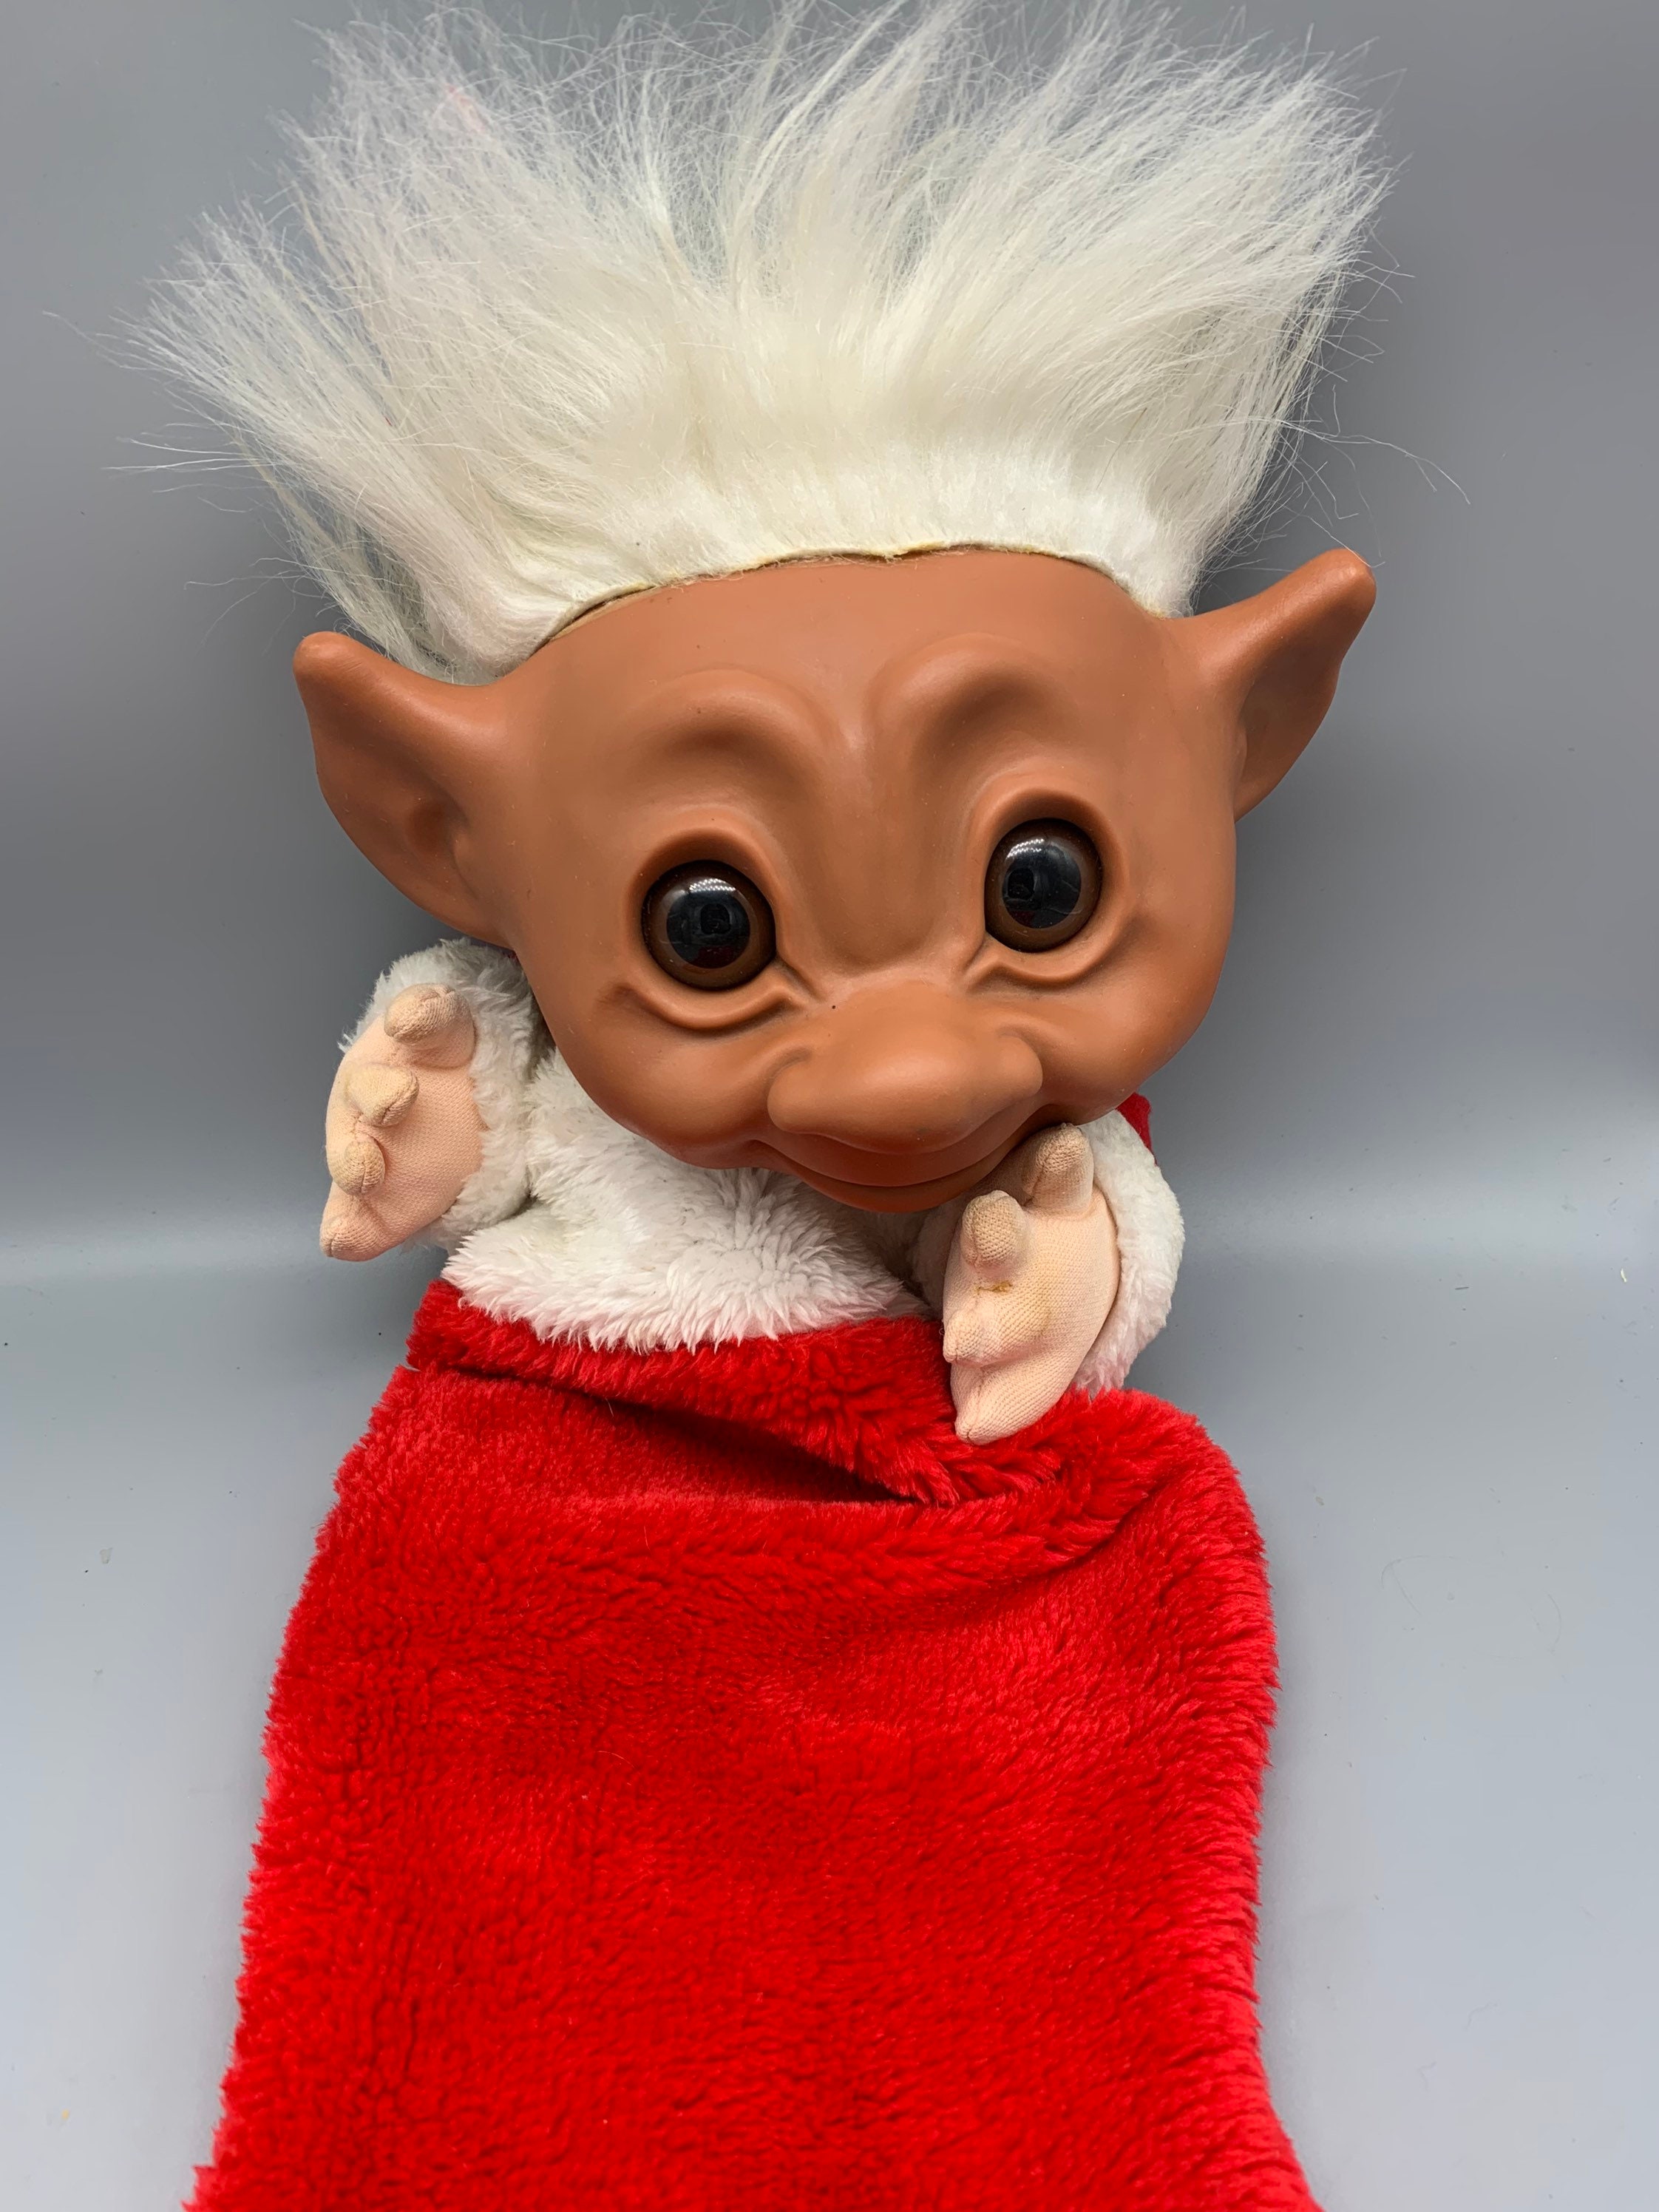 Troll Doll Christmas Stocking red Plush With White Hair Smiling Rubber Head  and Red Stocking With Hands Grasping, Vintage Trolls DAM 